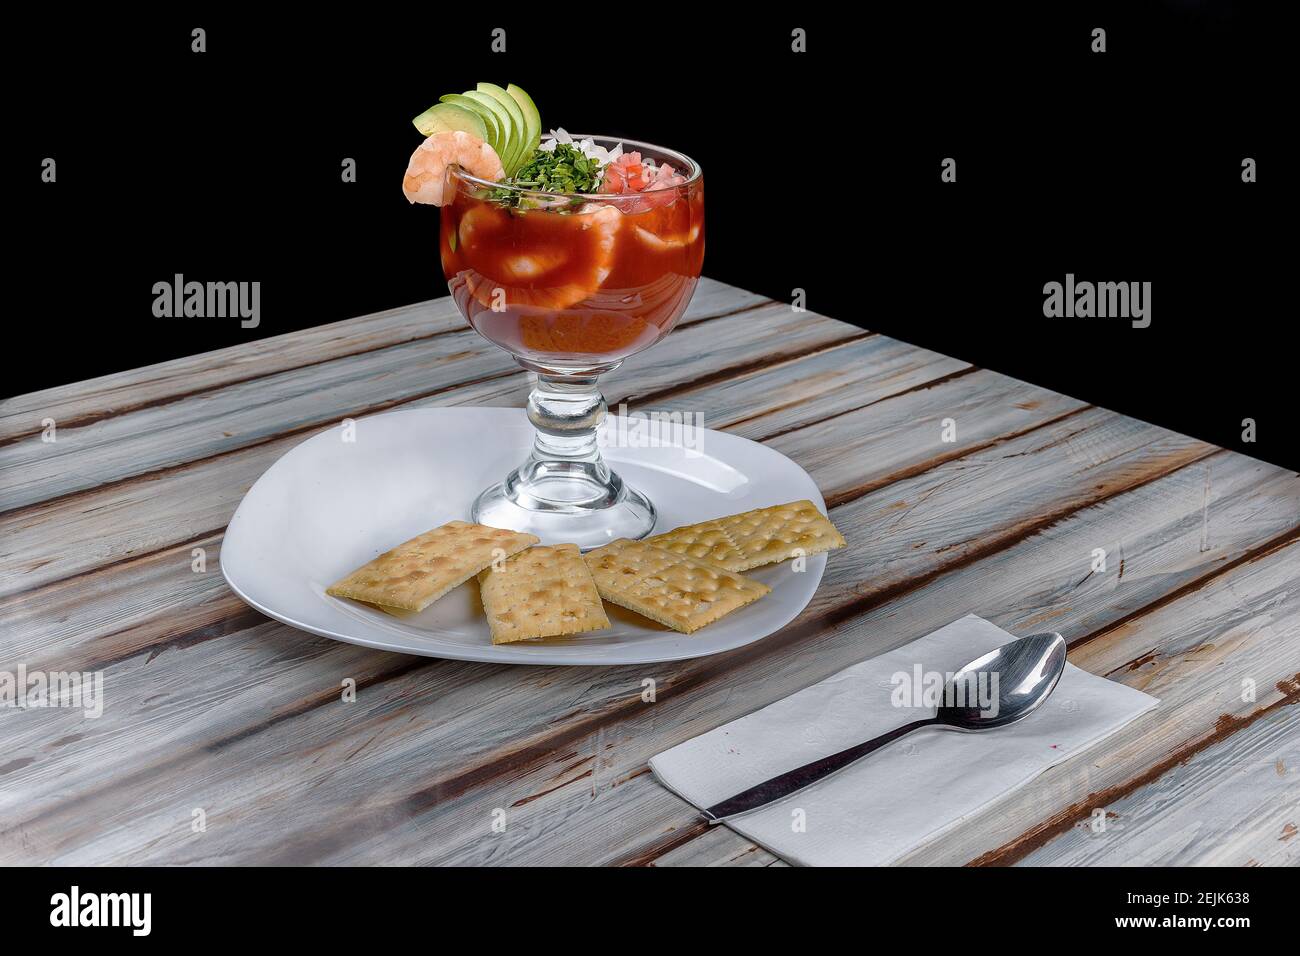 Shrimp cocktail with tomato sauce served in a large glass accompanied by crackers Stock Photo